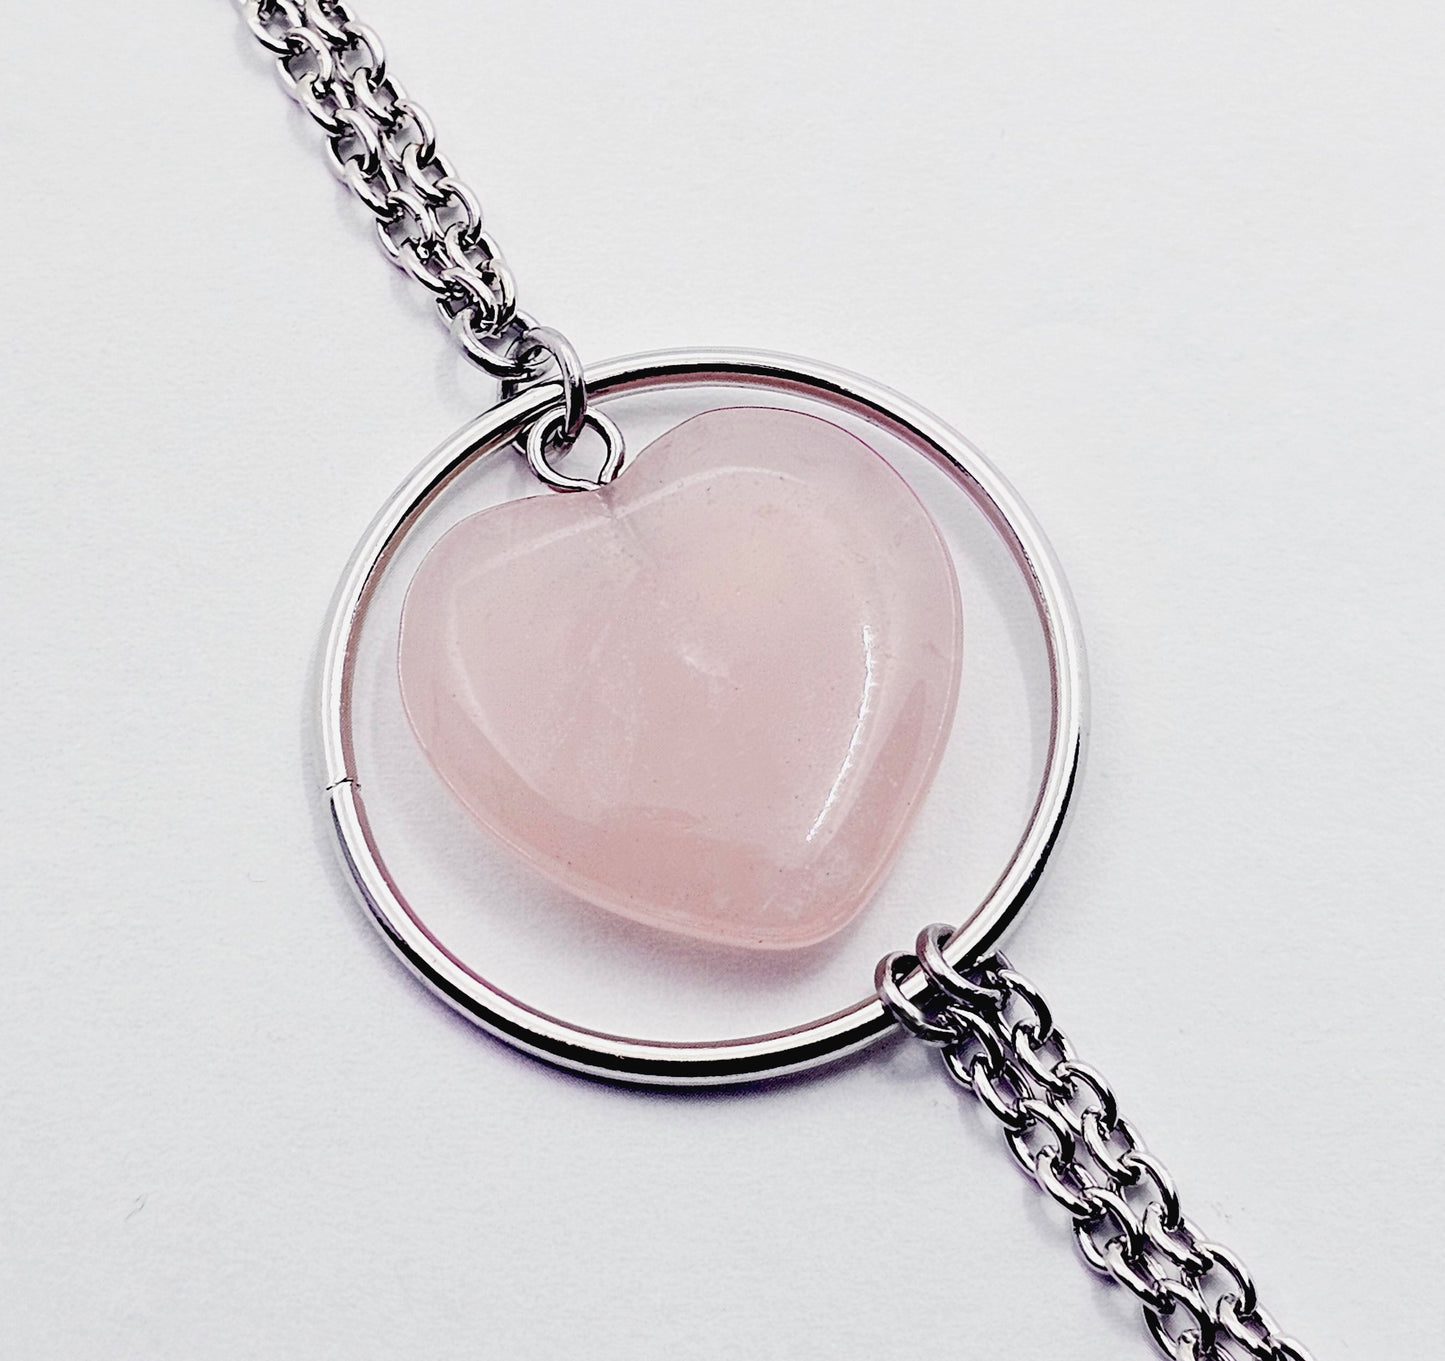 Necklace to Nipple with Real Crystal Heart, Circle of O. Non Piercing Nipple Nooses or Nipple Clamps.